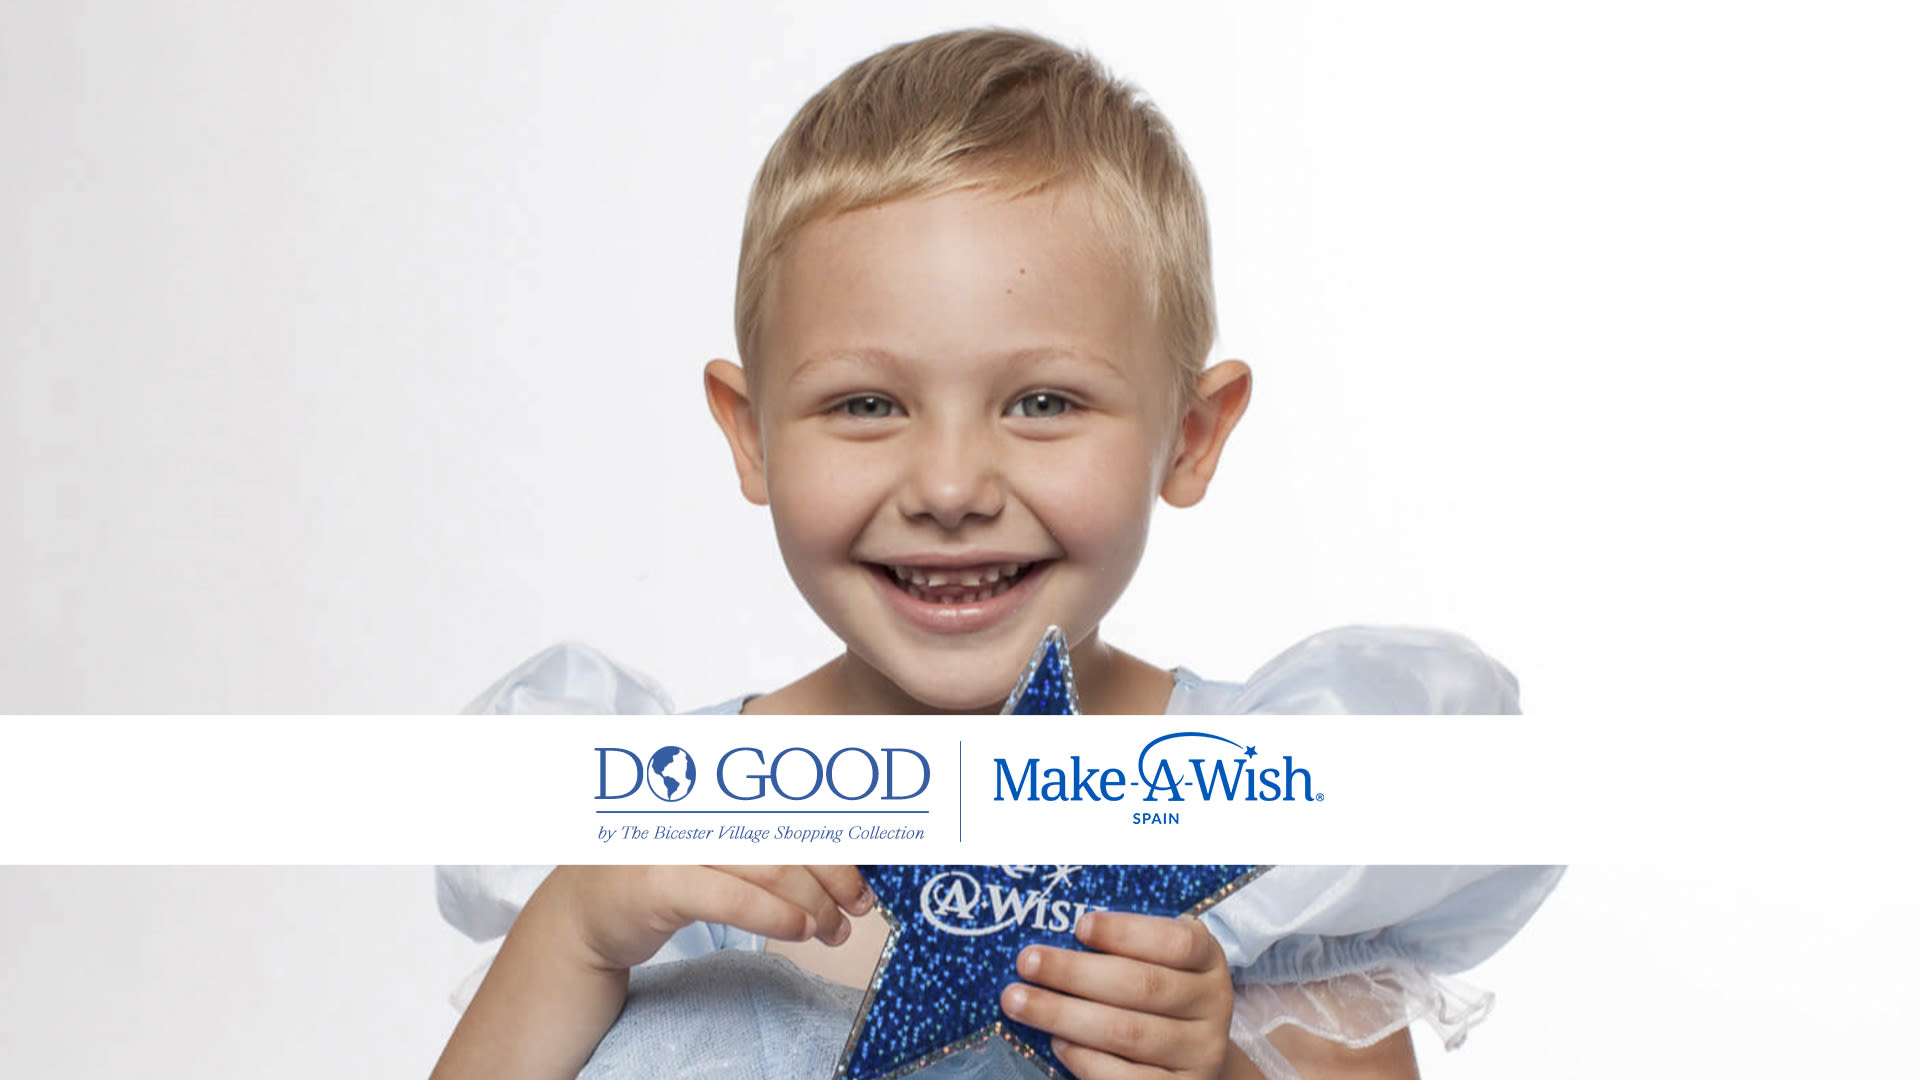 Las Rozas Village is proud to partner with Make-A-Wish Spain